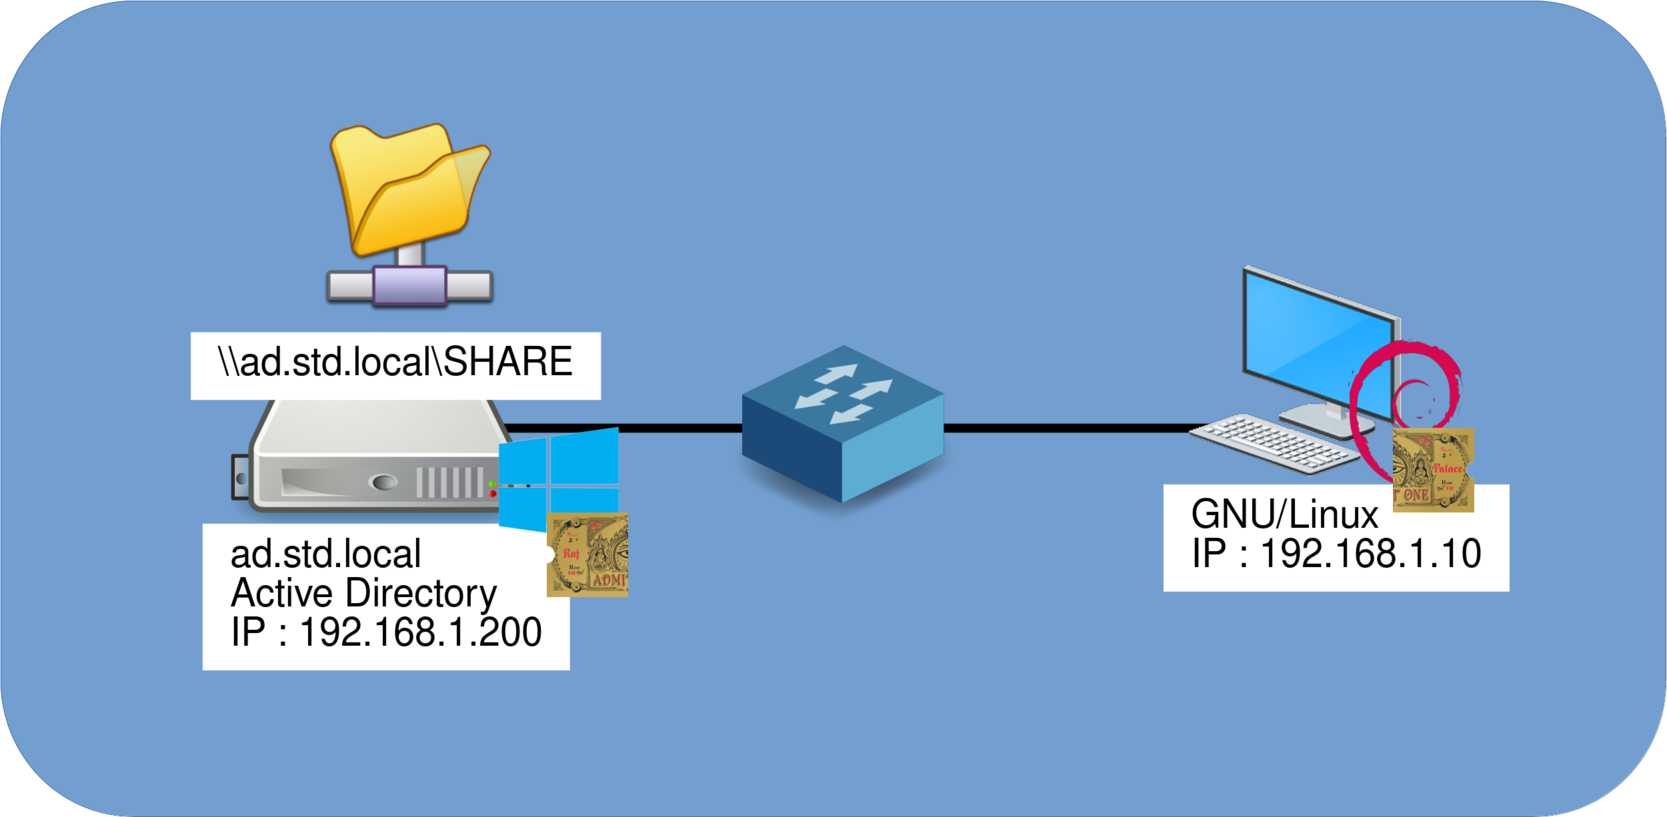 Network diagram depicting a Linux station and a Windows server file share